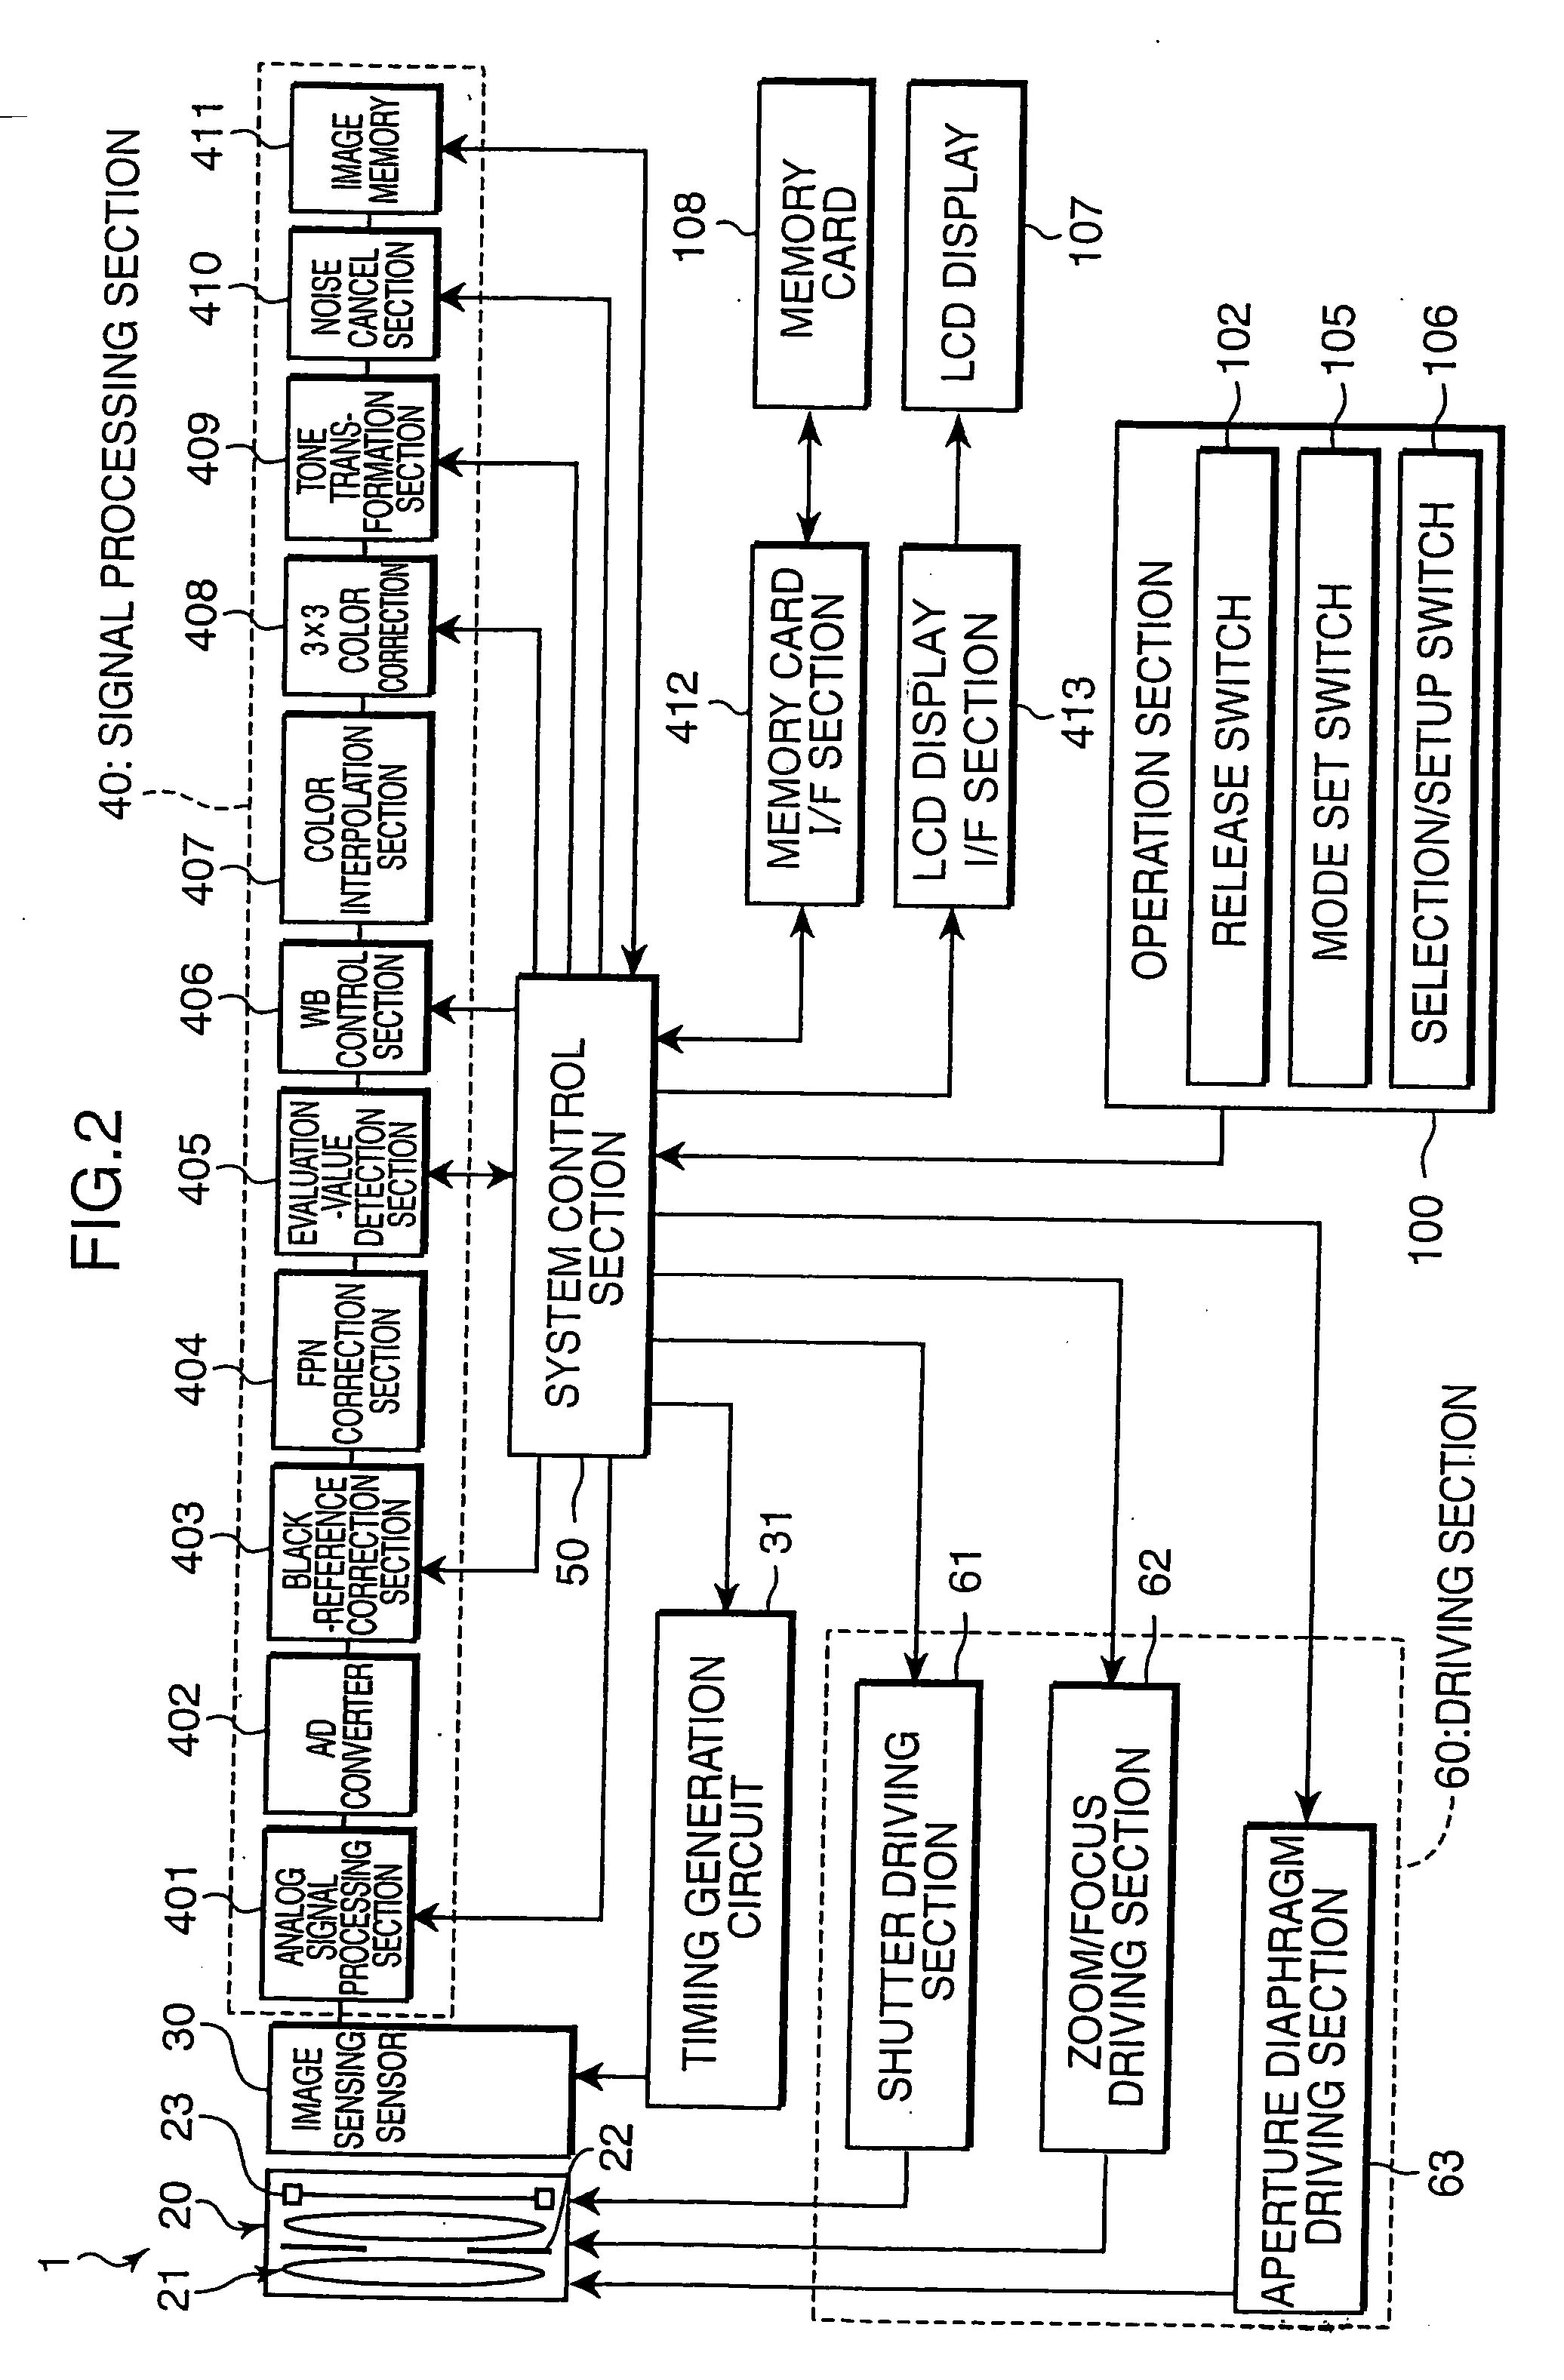 Image sensing apparatus and image processing method for use therein